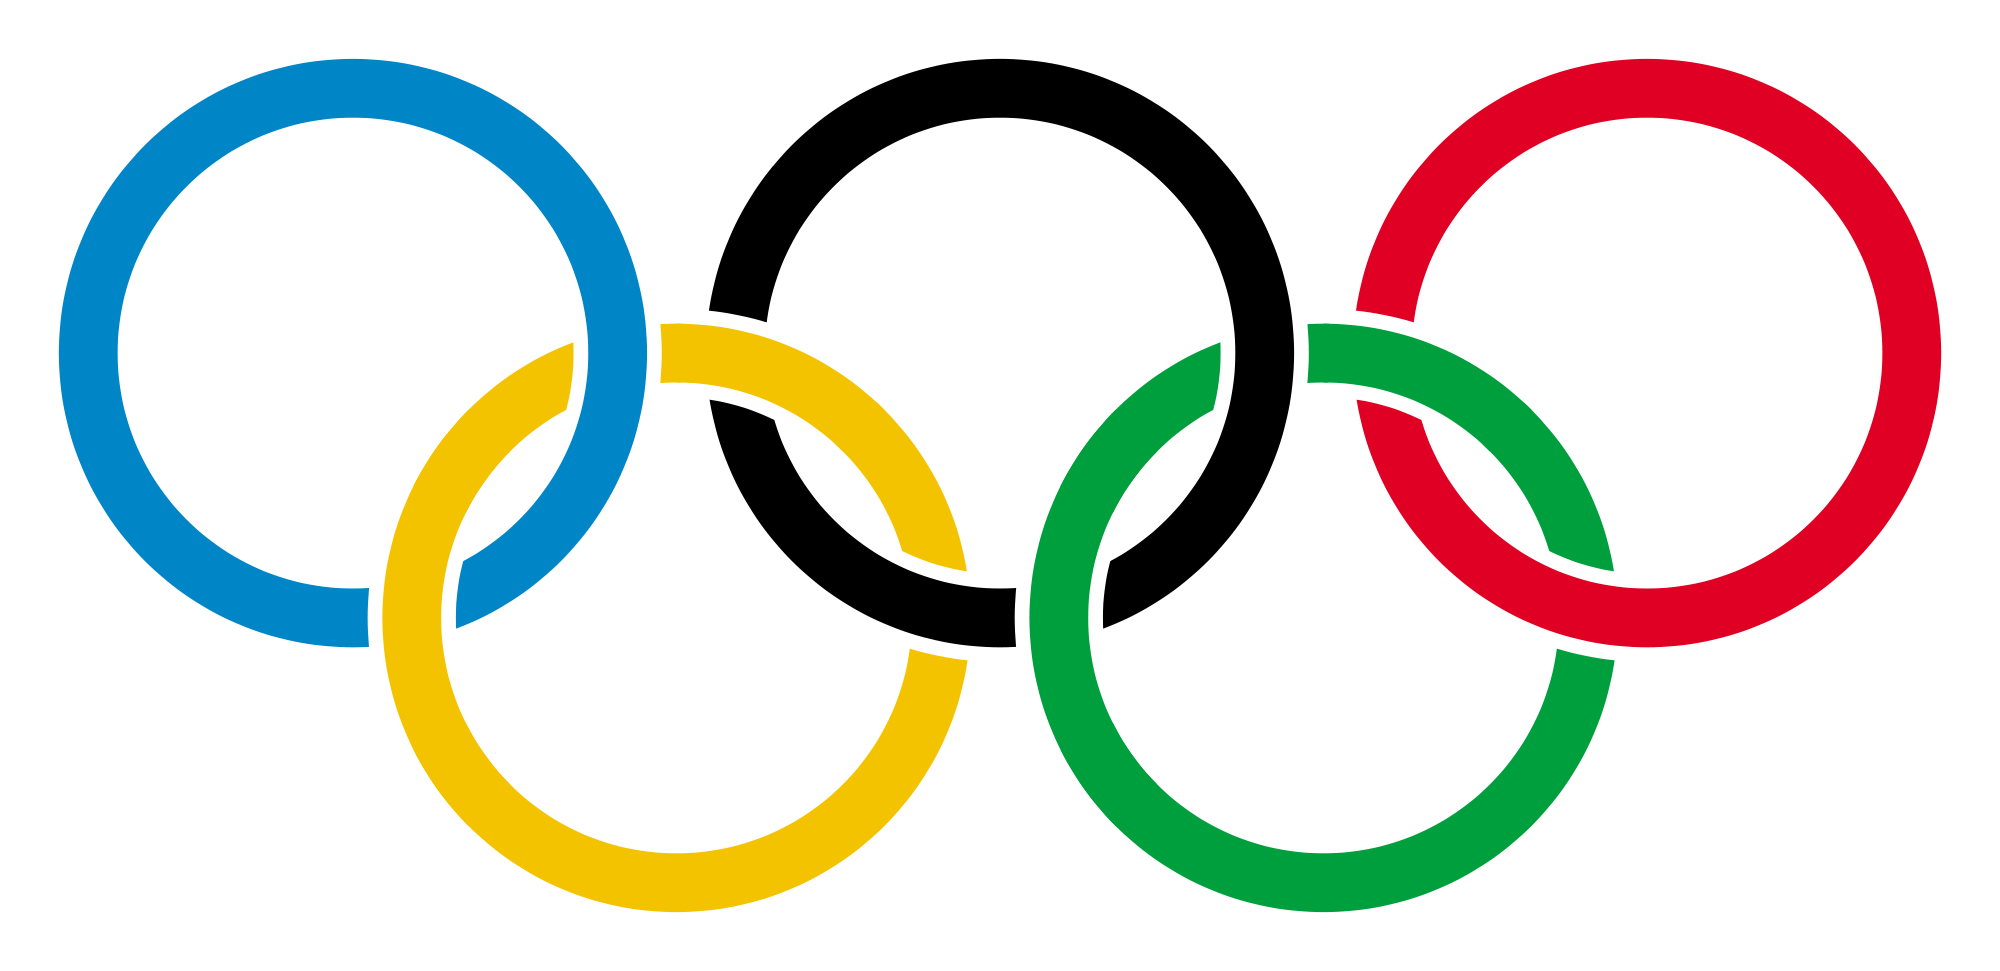 Compete in the Olympics Track